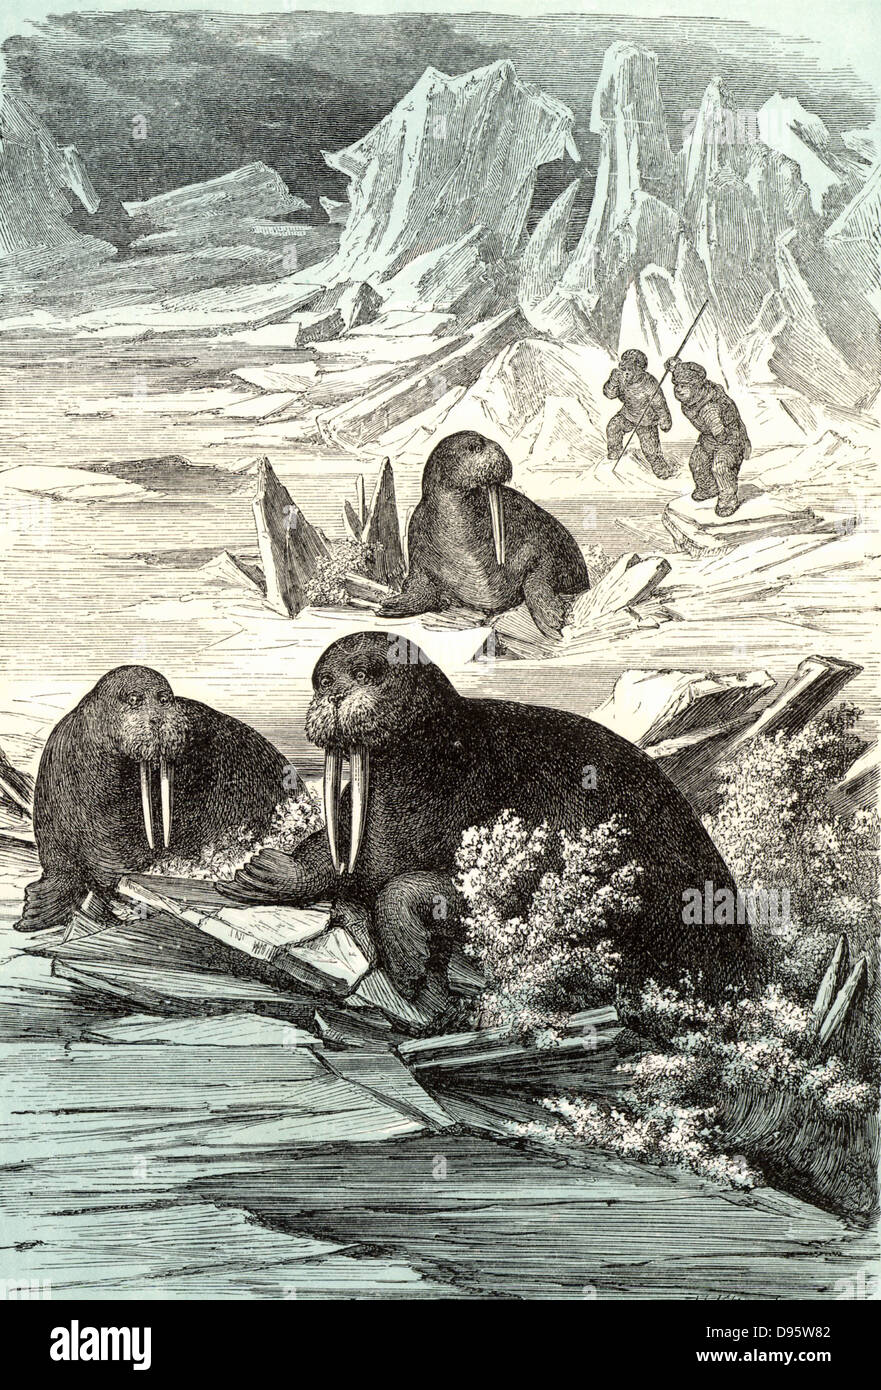 Hunting Walrus. Walrus (Odobenus rosmarus), large semi-aquatic mammal native to Arctic regions was hunted for its flesh, hide and its ivory tusks.  Chromoxylograph from 'The Polar World' by G Hartwig (London, 1874). Stock Photo